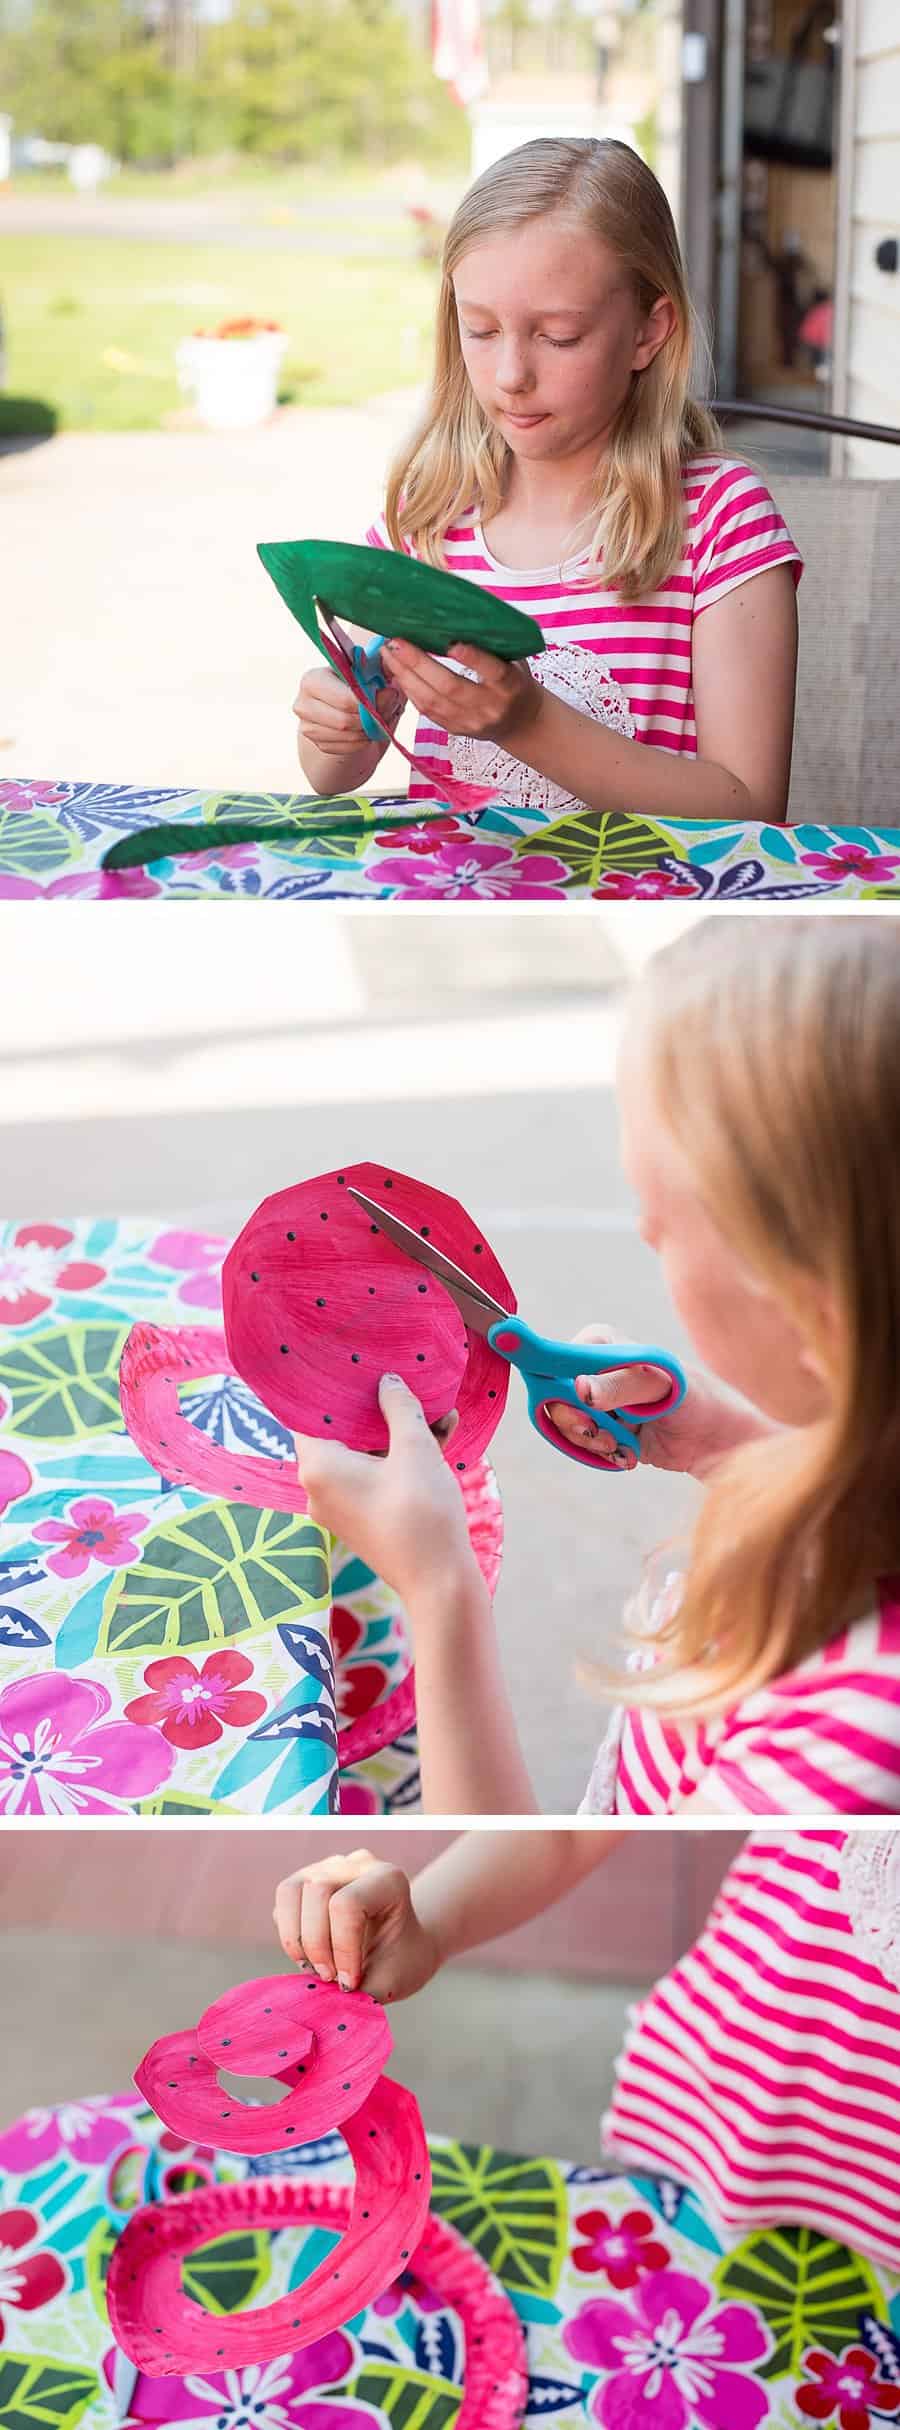 Watermelon Wind Spinner: Paper Plate Craft for Children *My kids would love this easy project. Saving this for summer break. Love the patriotic flag spinners too!